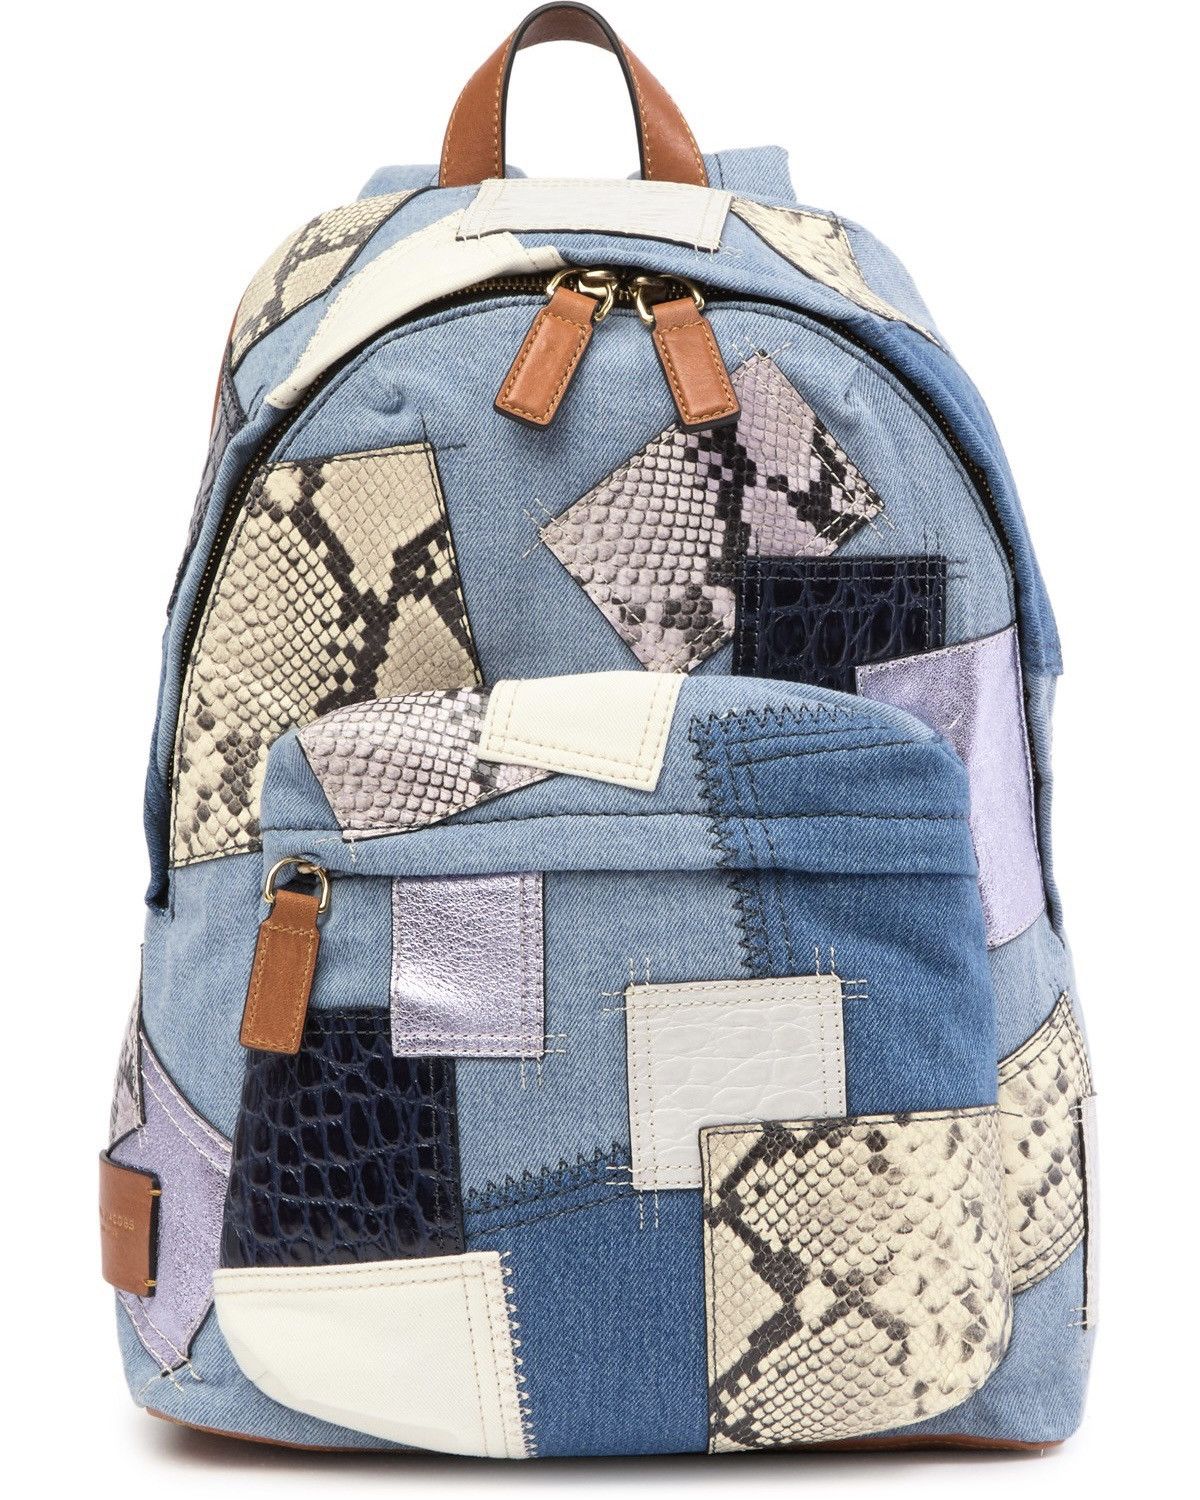 Marc Jacobs Kapital Patches Backpack Multi Patches Faded - 1